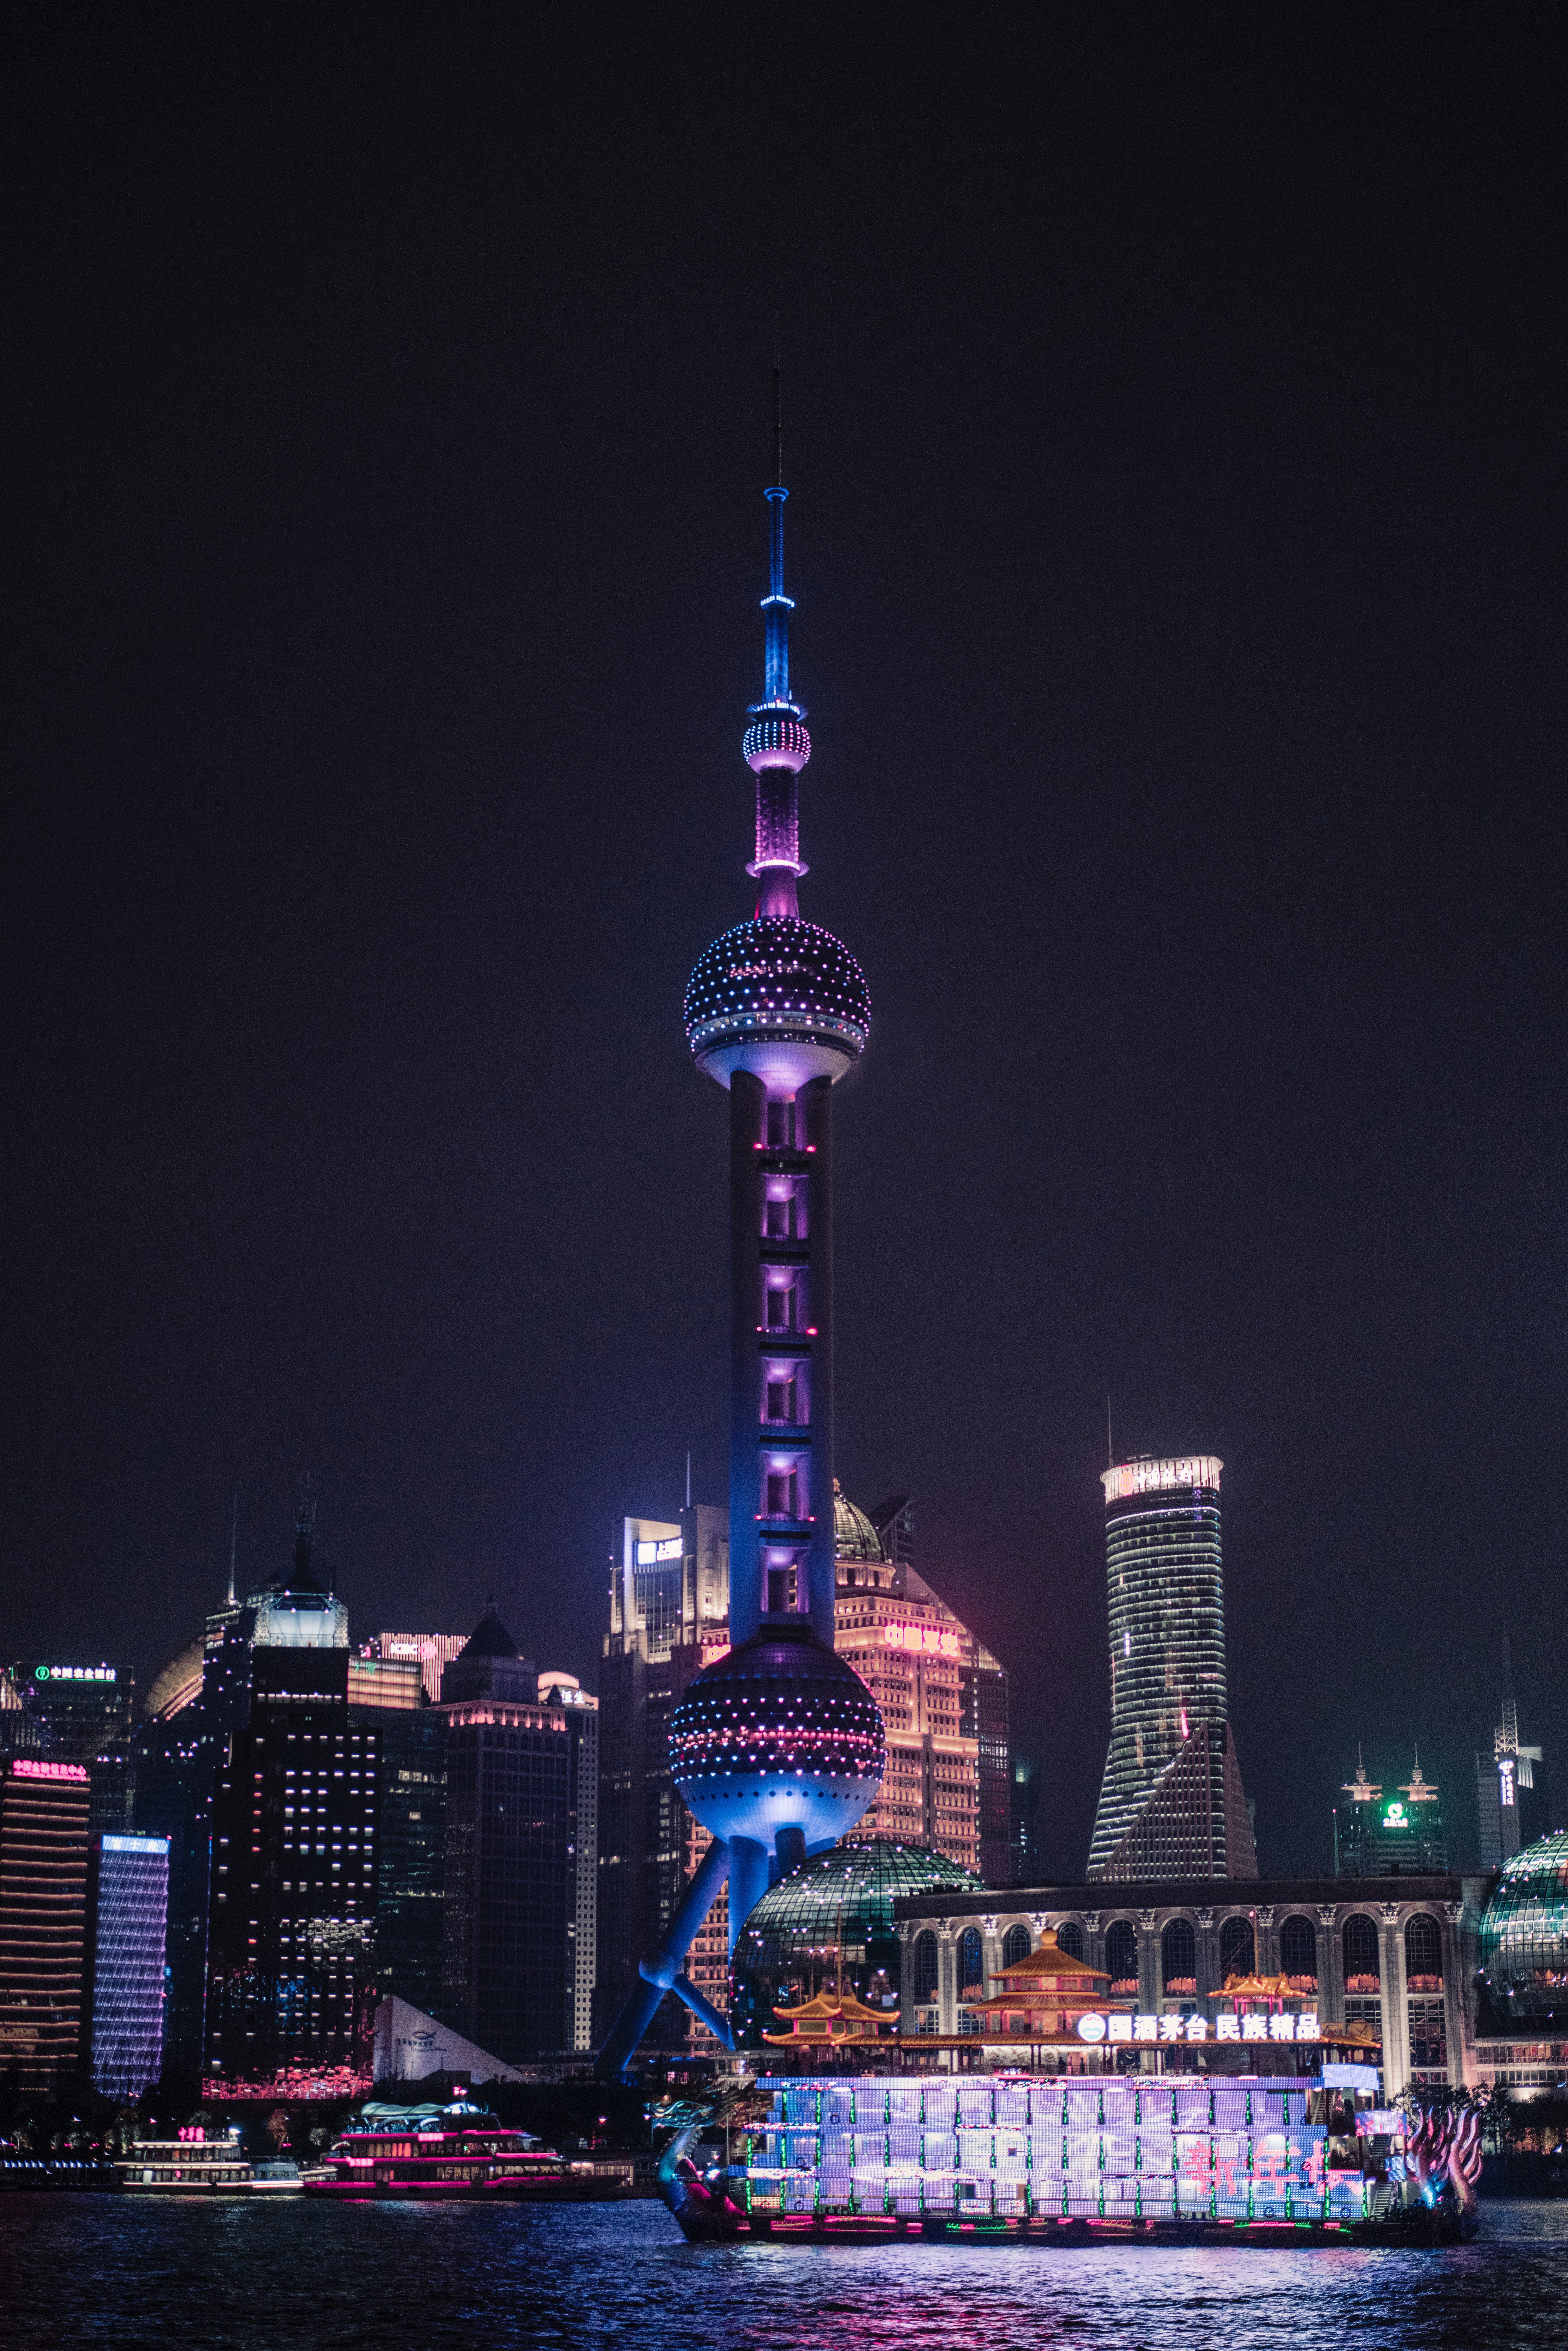 china, cities, architecture, building, night city, tower, shanghai cellphone